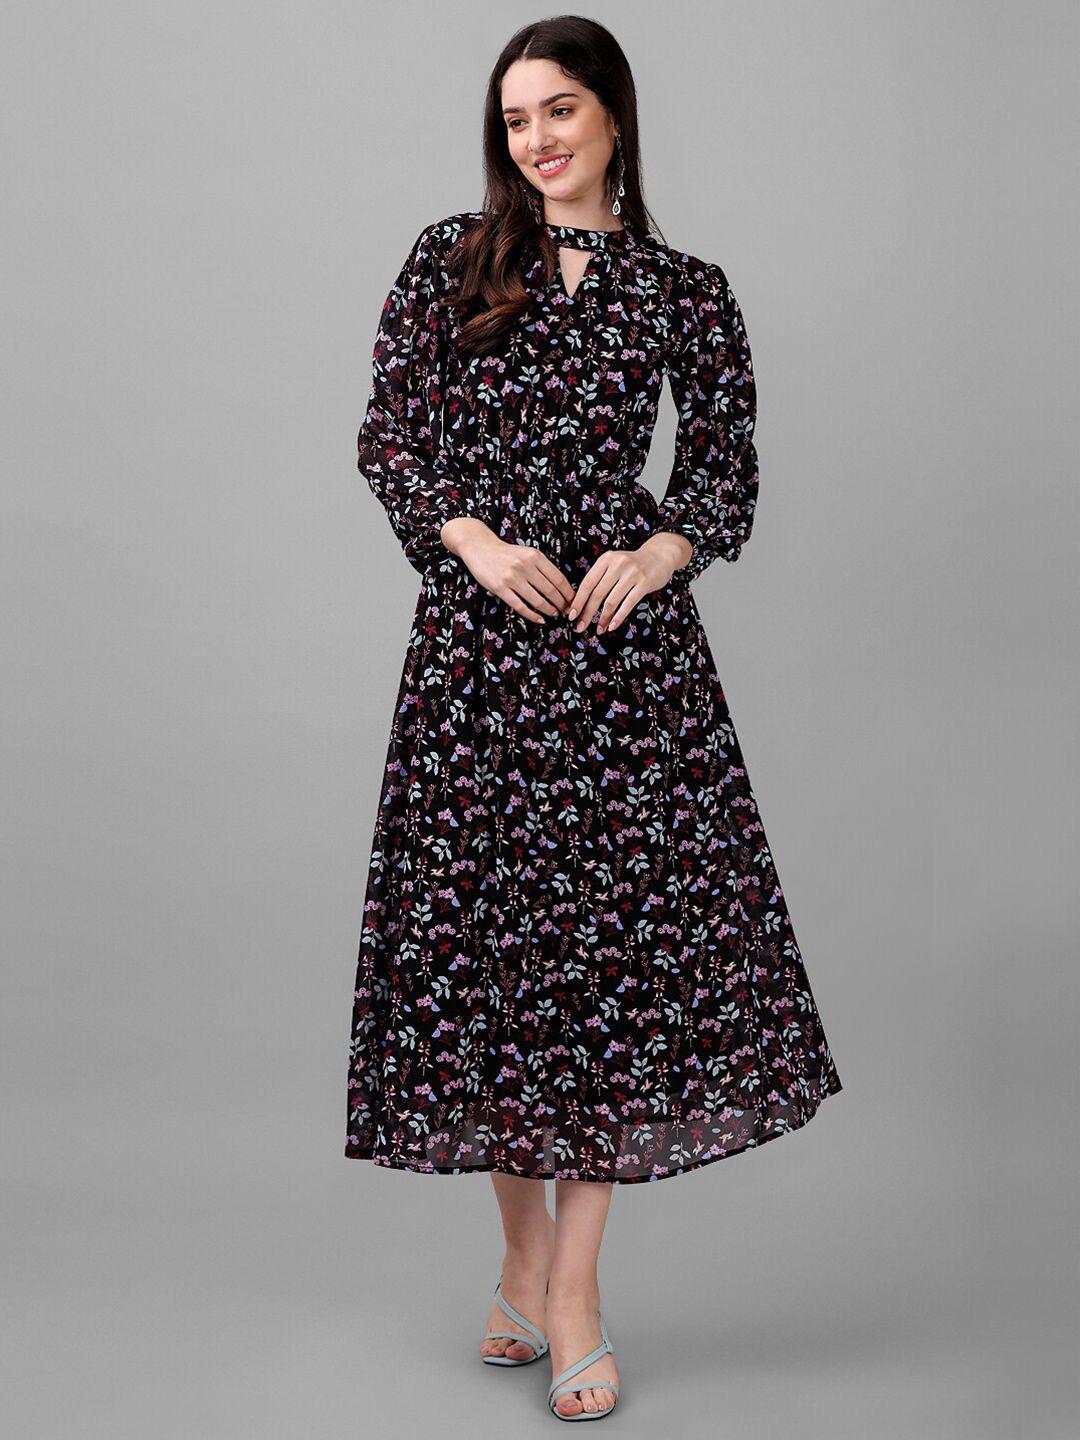 masakali co floral printed keyhole neck fit and flare midi dress